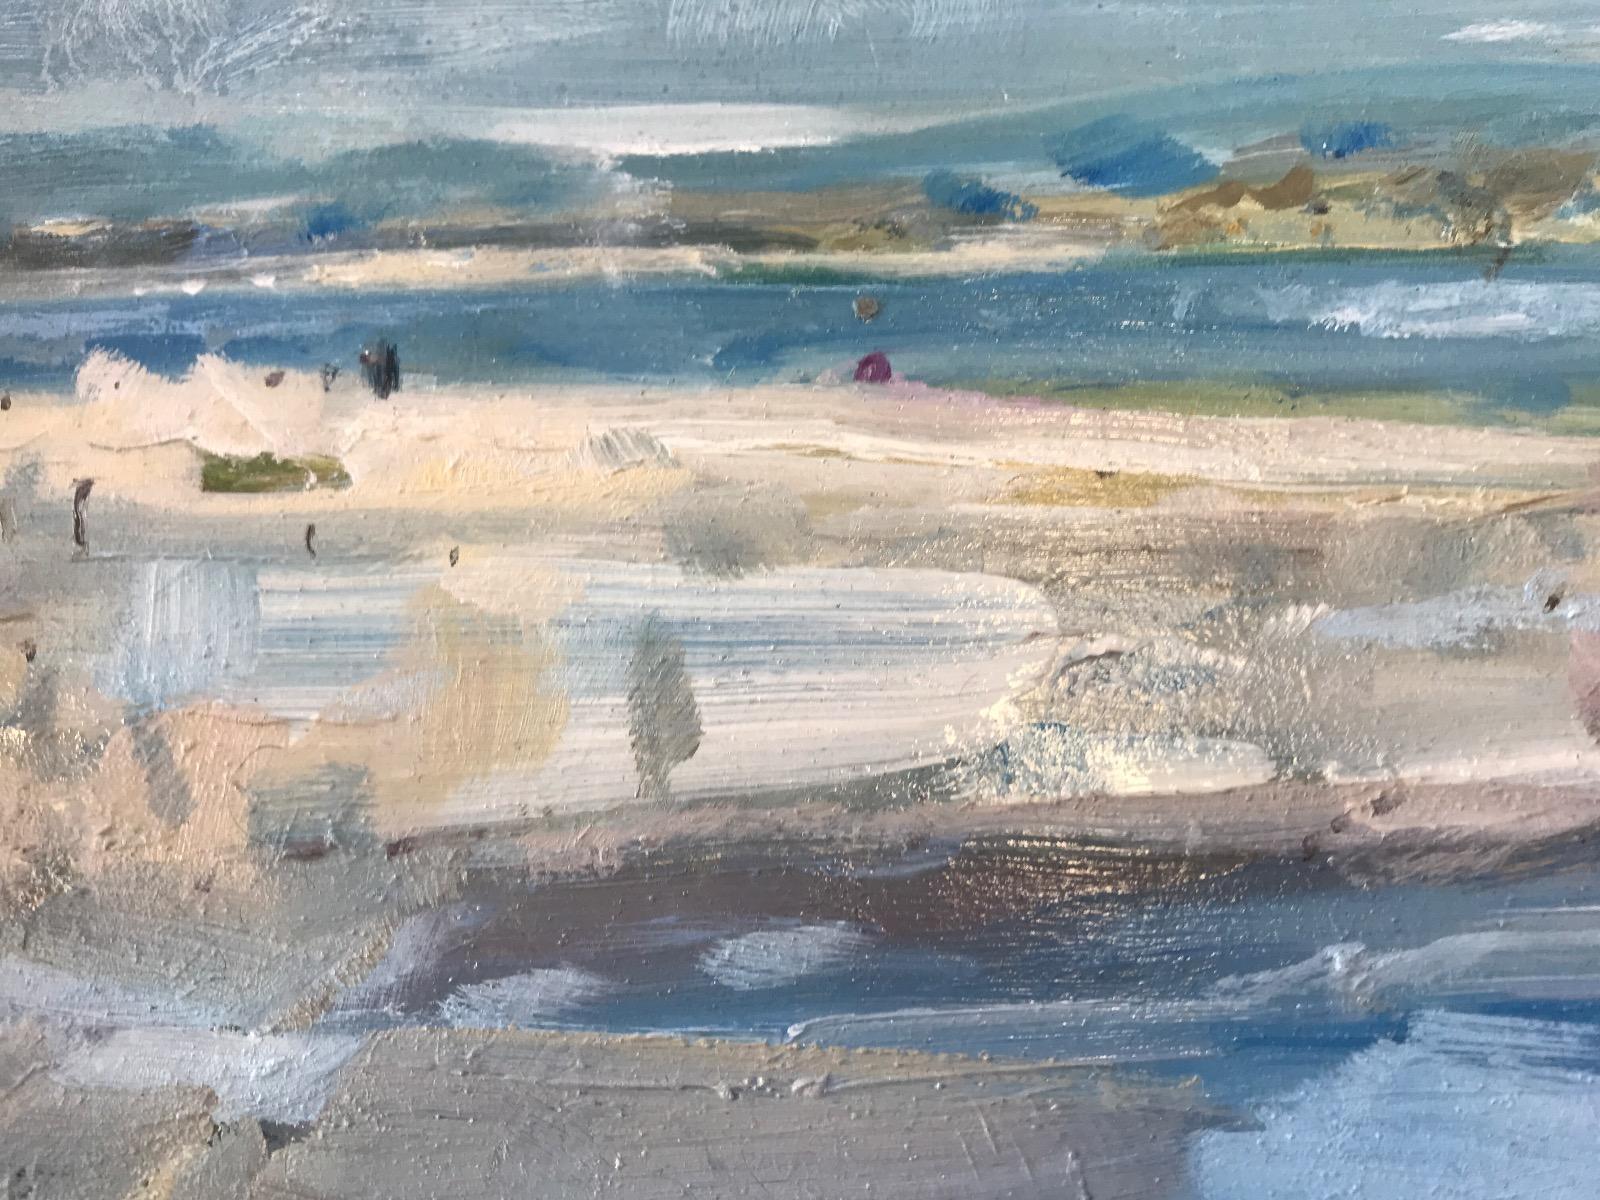 East Head, Windy Day - Painting by Stephen Kinder